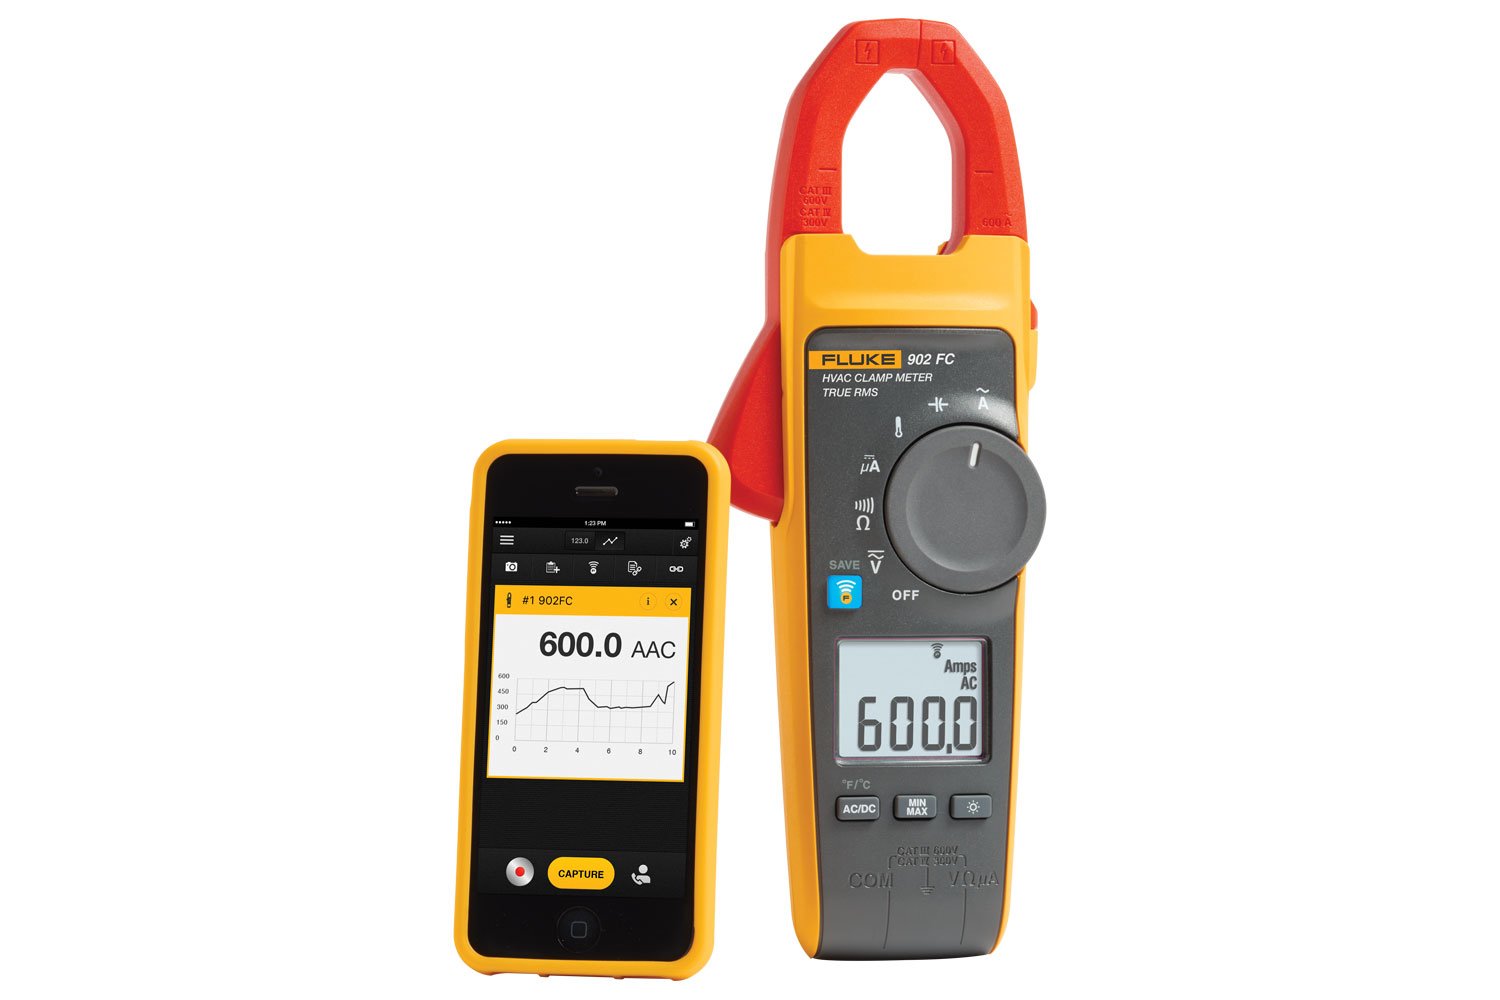 LIMEI-ZEN Super Large Caliber 0-3200A AC Leakage Current Clamp Meter with Digital clamp Ammeter RS232 Interface 99 Data Logger ETCR7100 Precision Measuring Instrument Multifunction Tester 